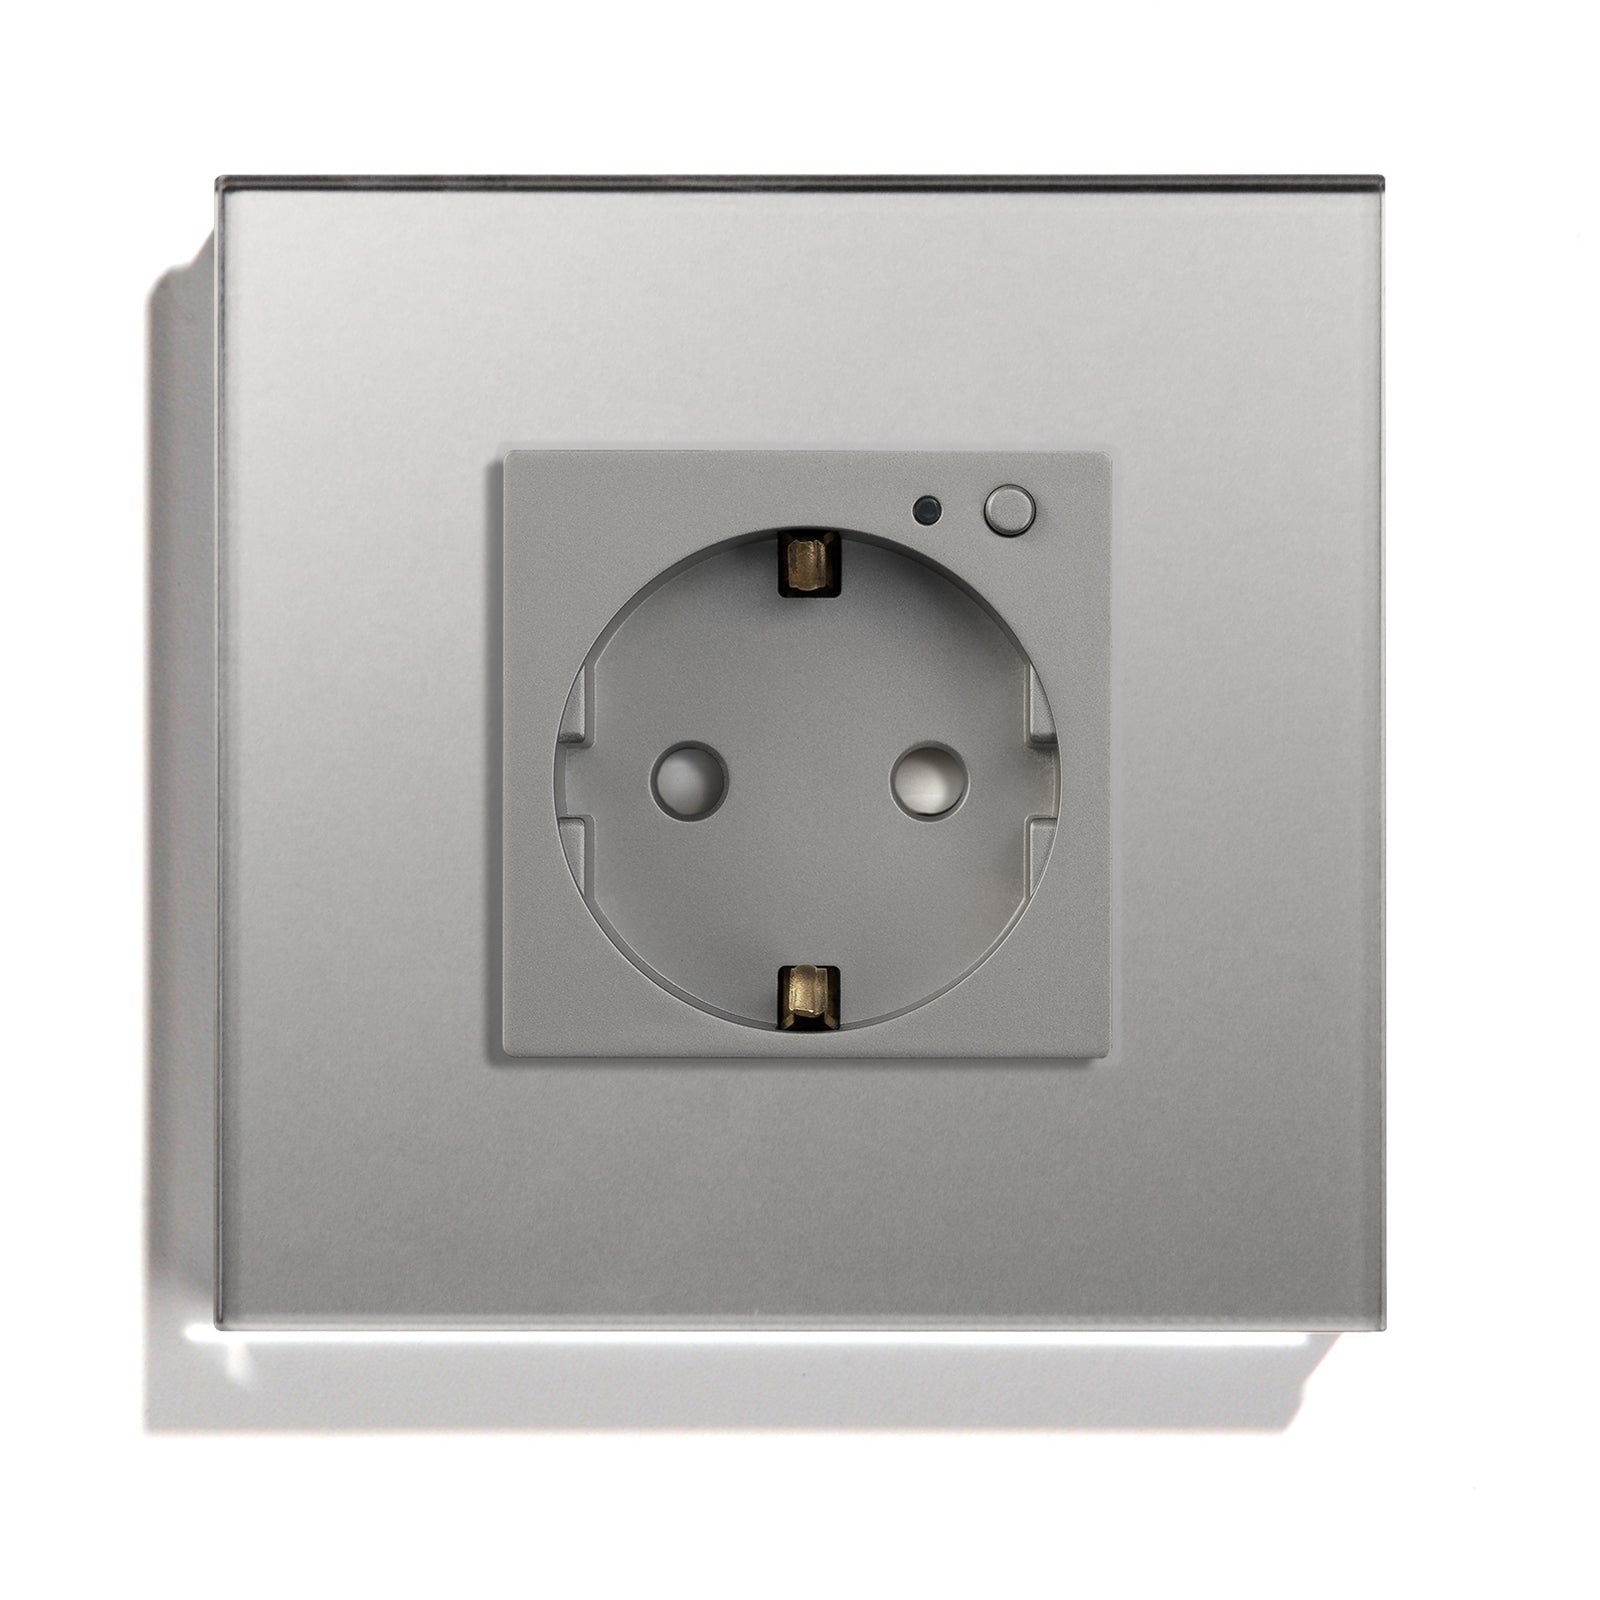 BSEED ZigBee EU Wall Sockets Power Outlets Kids Protection Wall Plates & Covers Bseedswitch grey Signle 